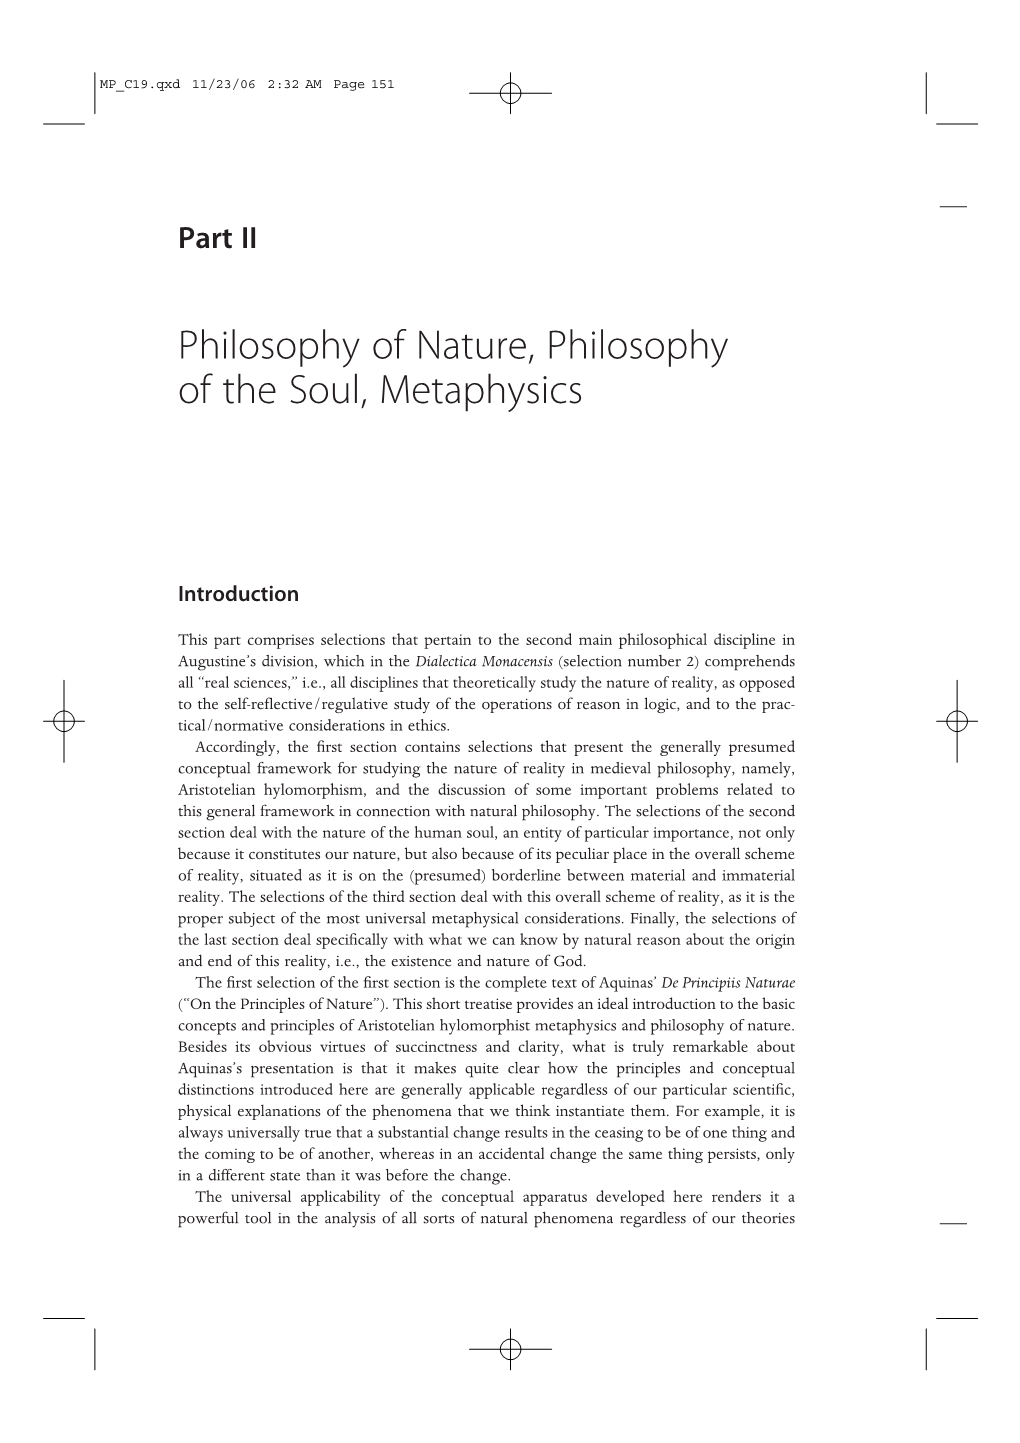 Part 2: Philosophy of Nature, Philosophy of the Soul, Metaphysics